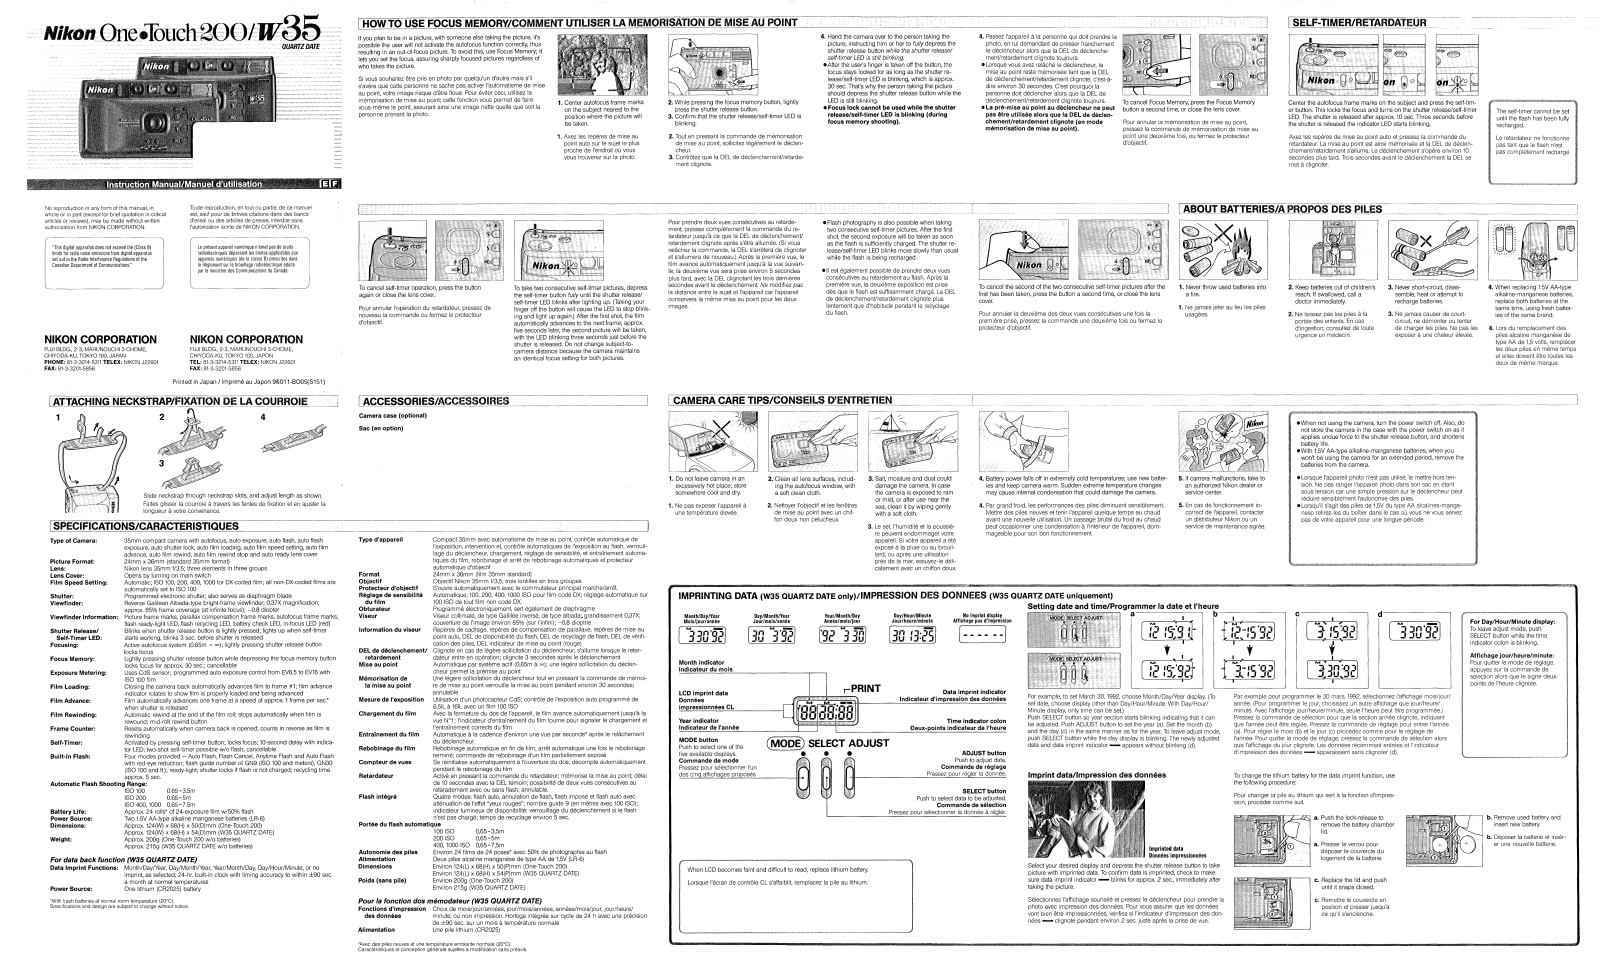 Nikon W35, One Touch 200 Operating Instructions